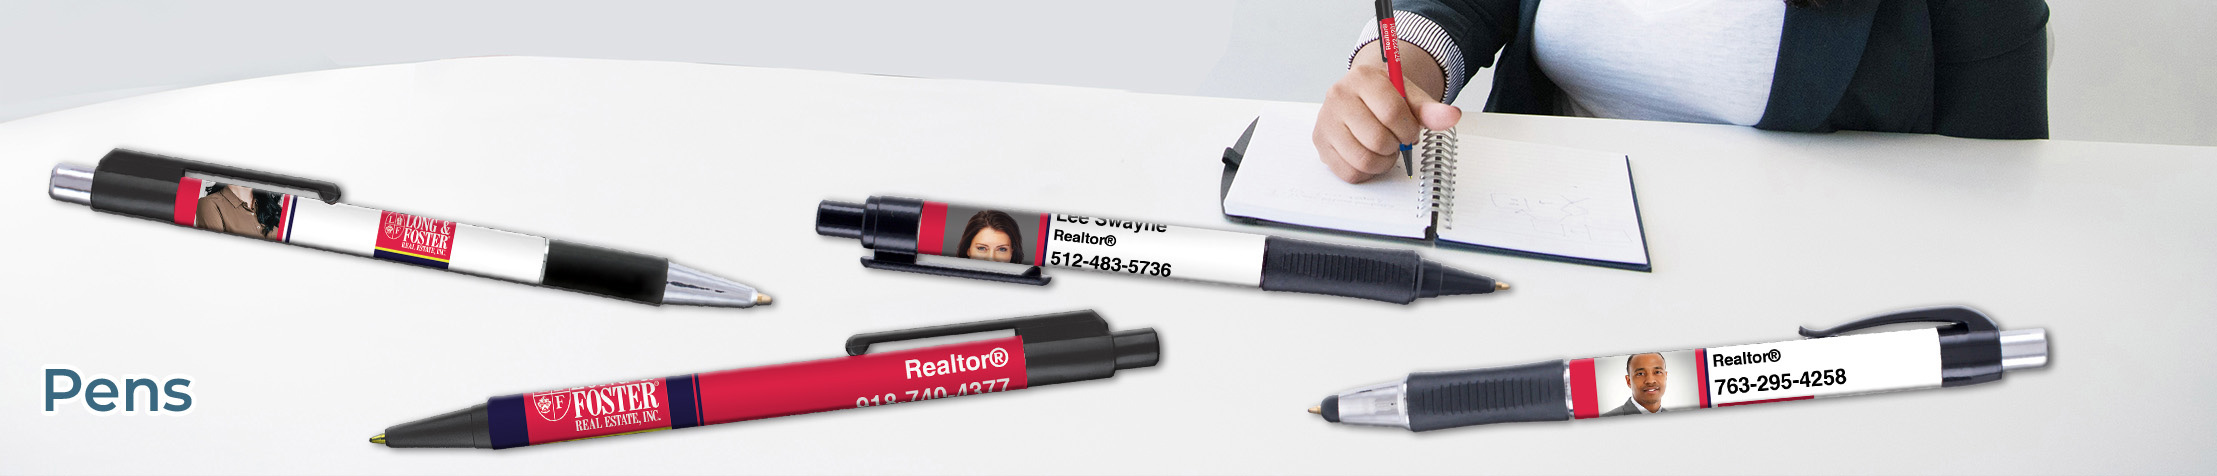 Long and Foster Real Estate Pens - Long and Foster  personalized realtor promotional products | BestPrintBuy.com